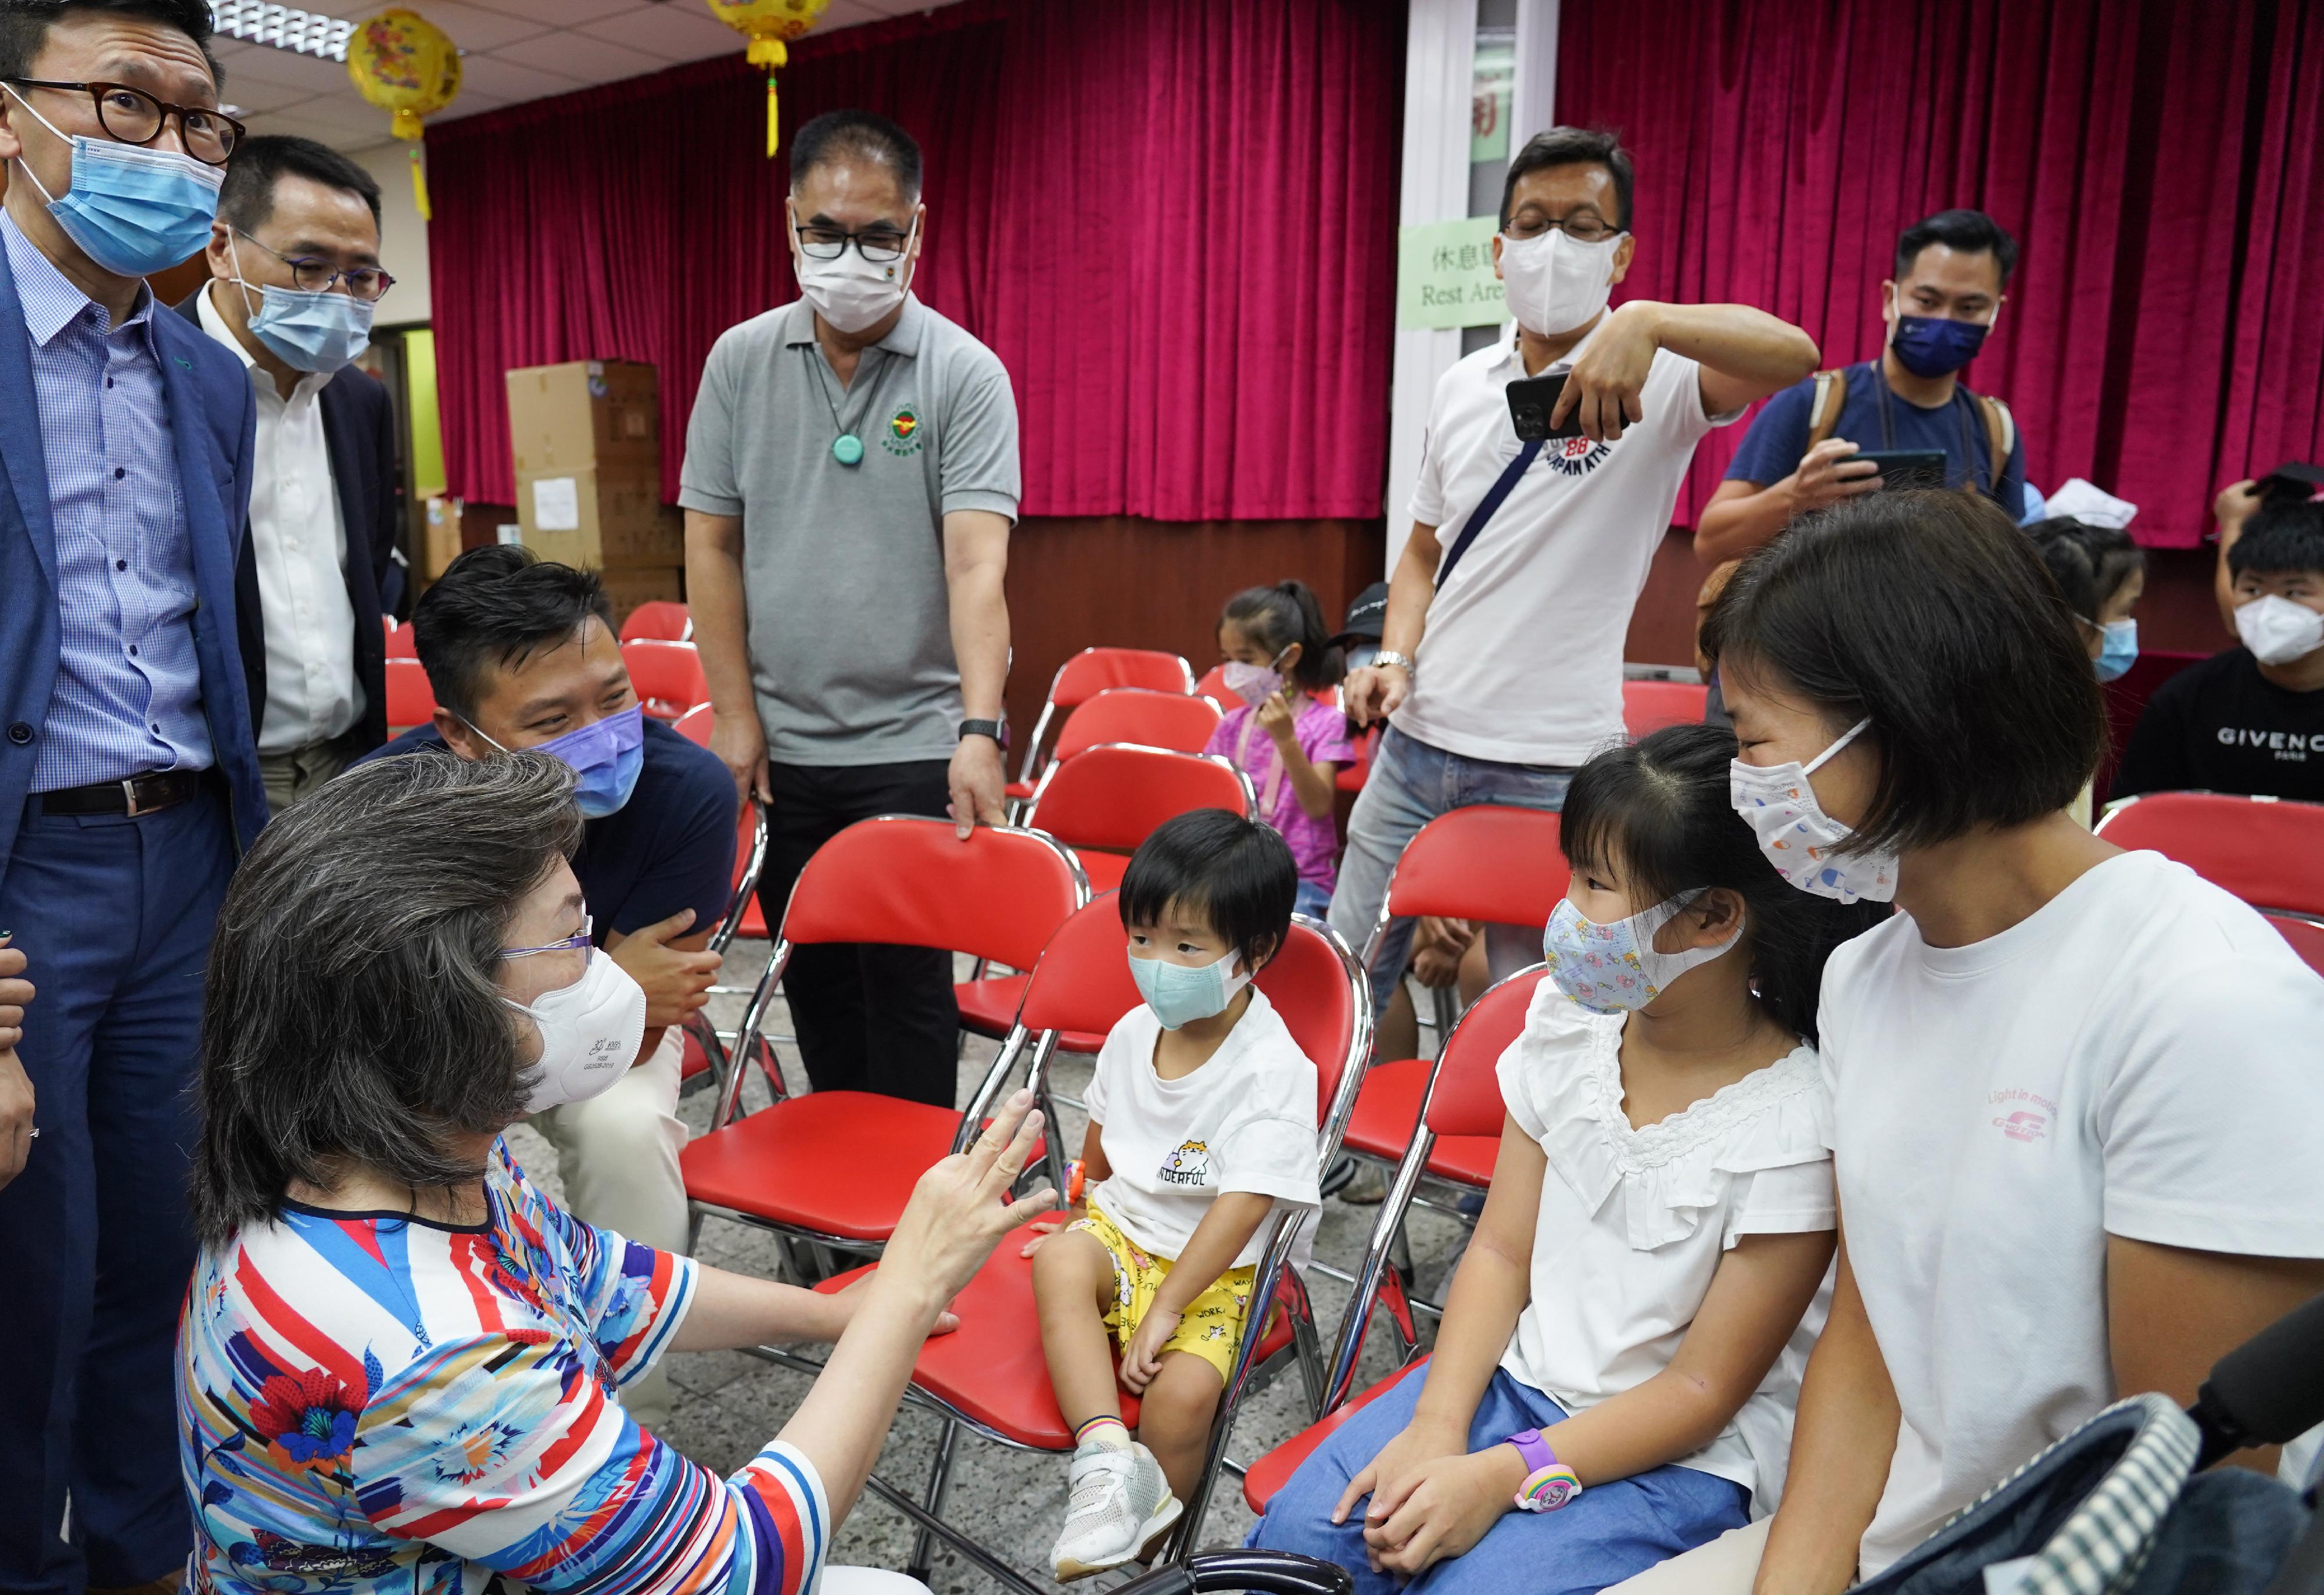 The Secretary for the Civil Service, Mrs Ingrid Yeung, attended a COVID-19 vaccination event in Sham Shui Po today (September 17) and appealed to members of the public to take action to receive a suitable number of vaccine doses on time for self-protection. Photo shows Mrs Yeung (front row, first left) chatting with children who just received their COVID-19 vaccine.